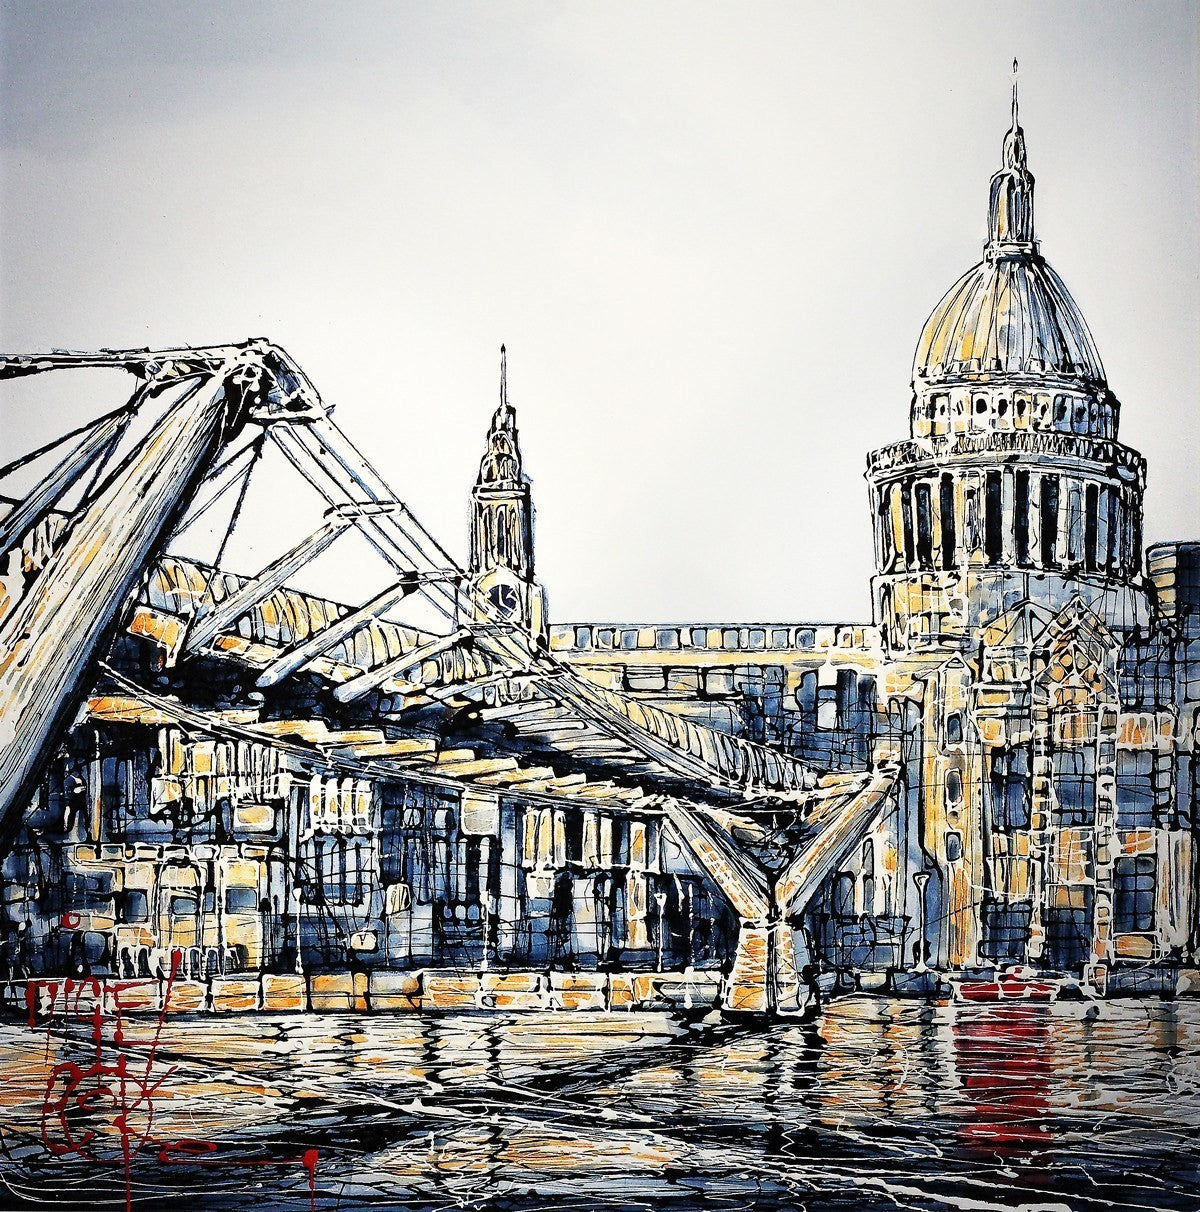 From the Tate to St. Paul's - SOLD Nigel Cooke